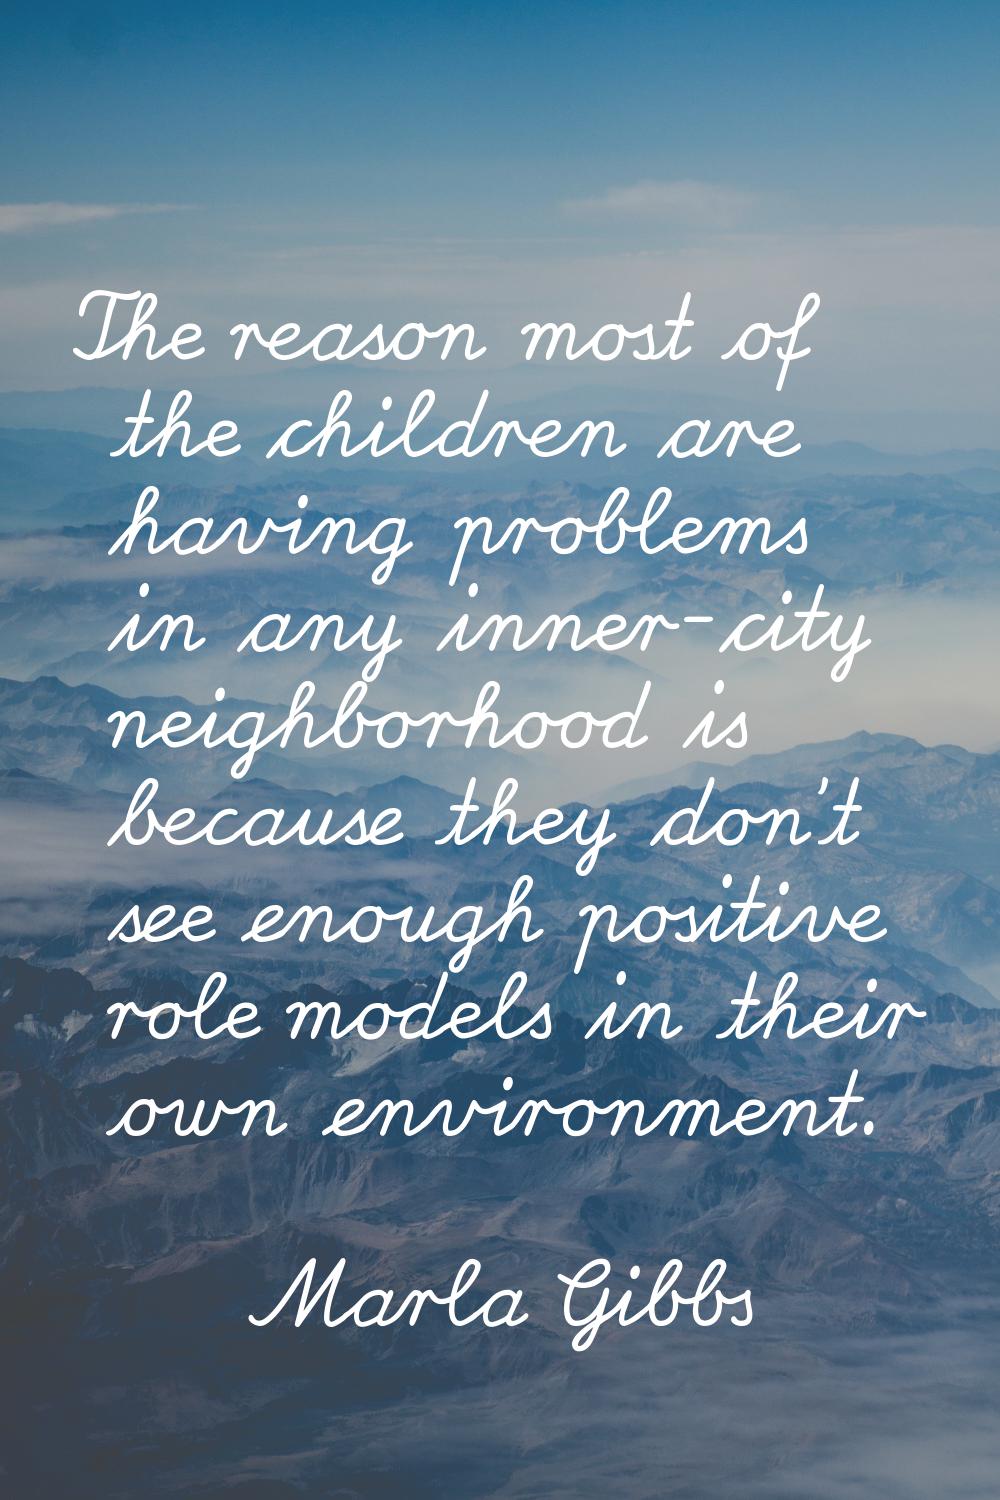 The reason most of the children are having problems in any inner-city neighborhood is because they 